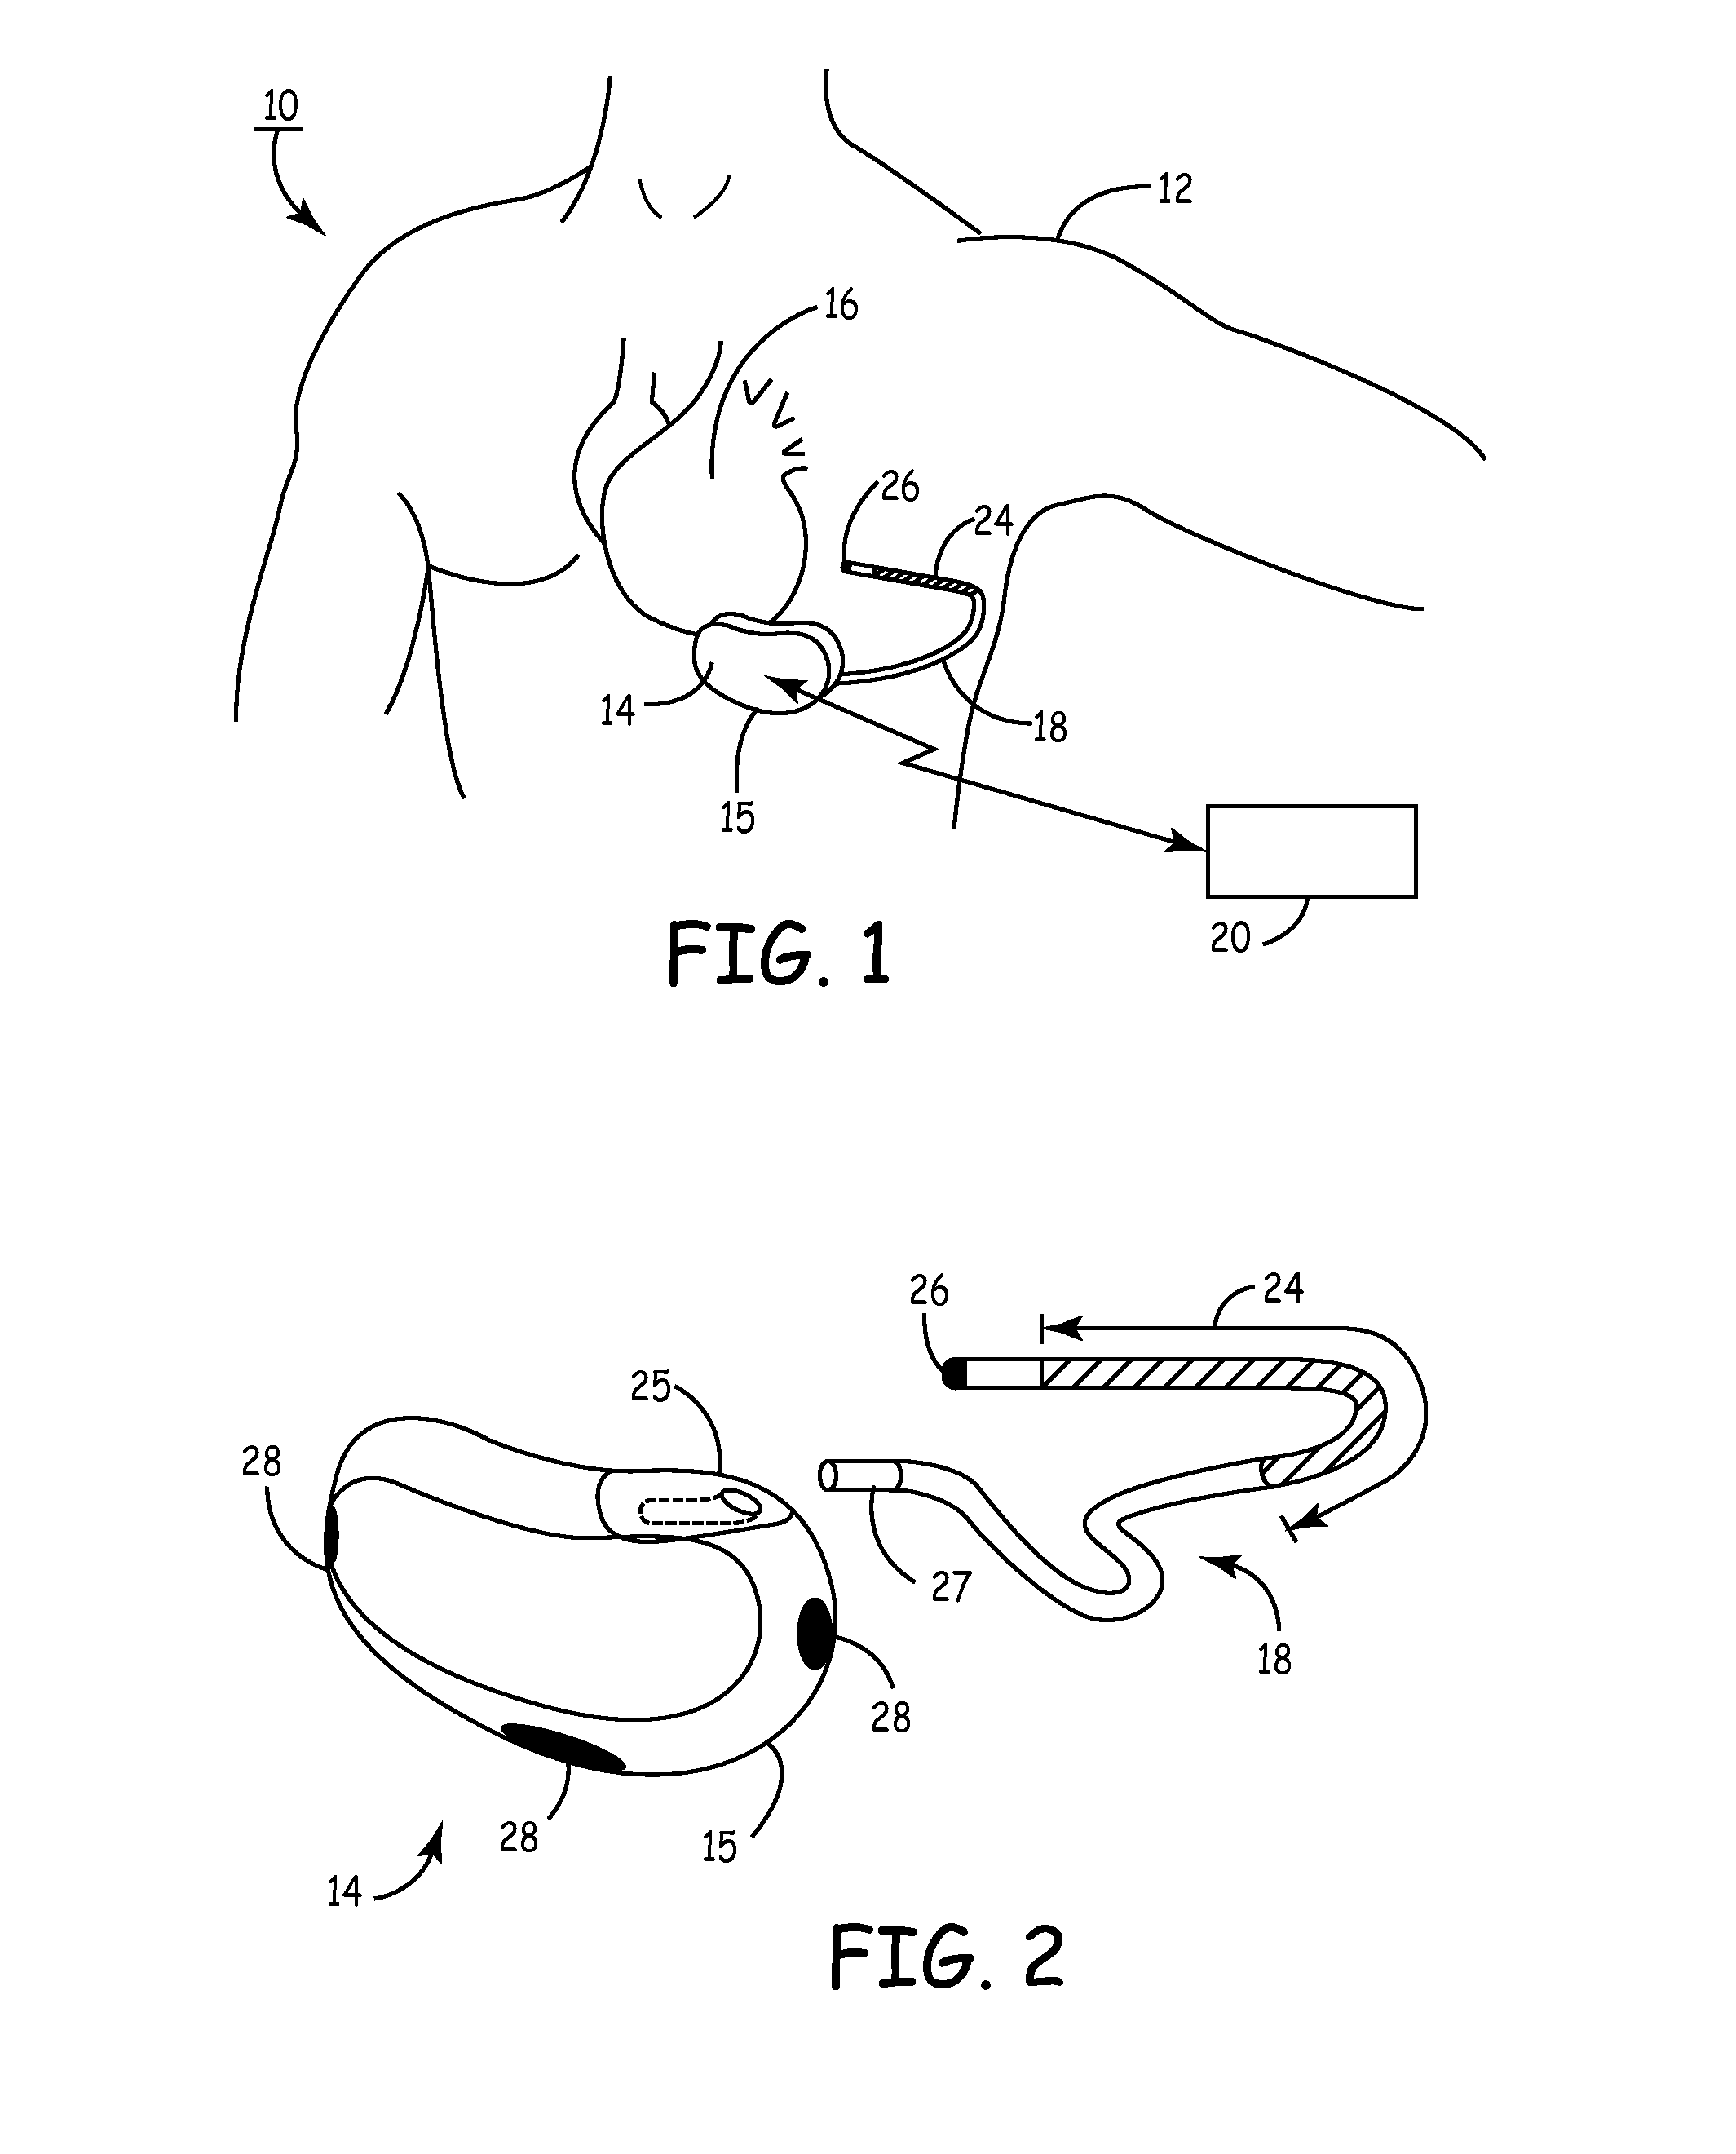 Method and apparatus for detecting arrhythmias in a medical device